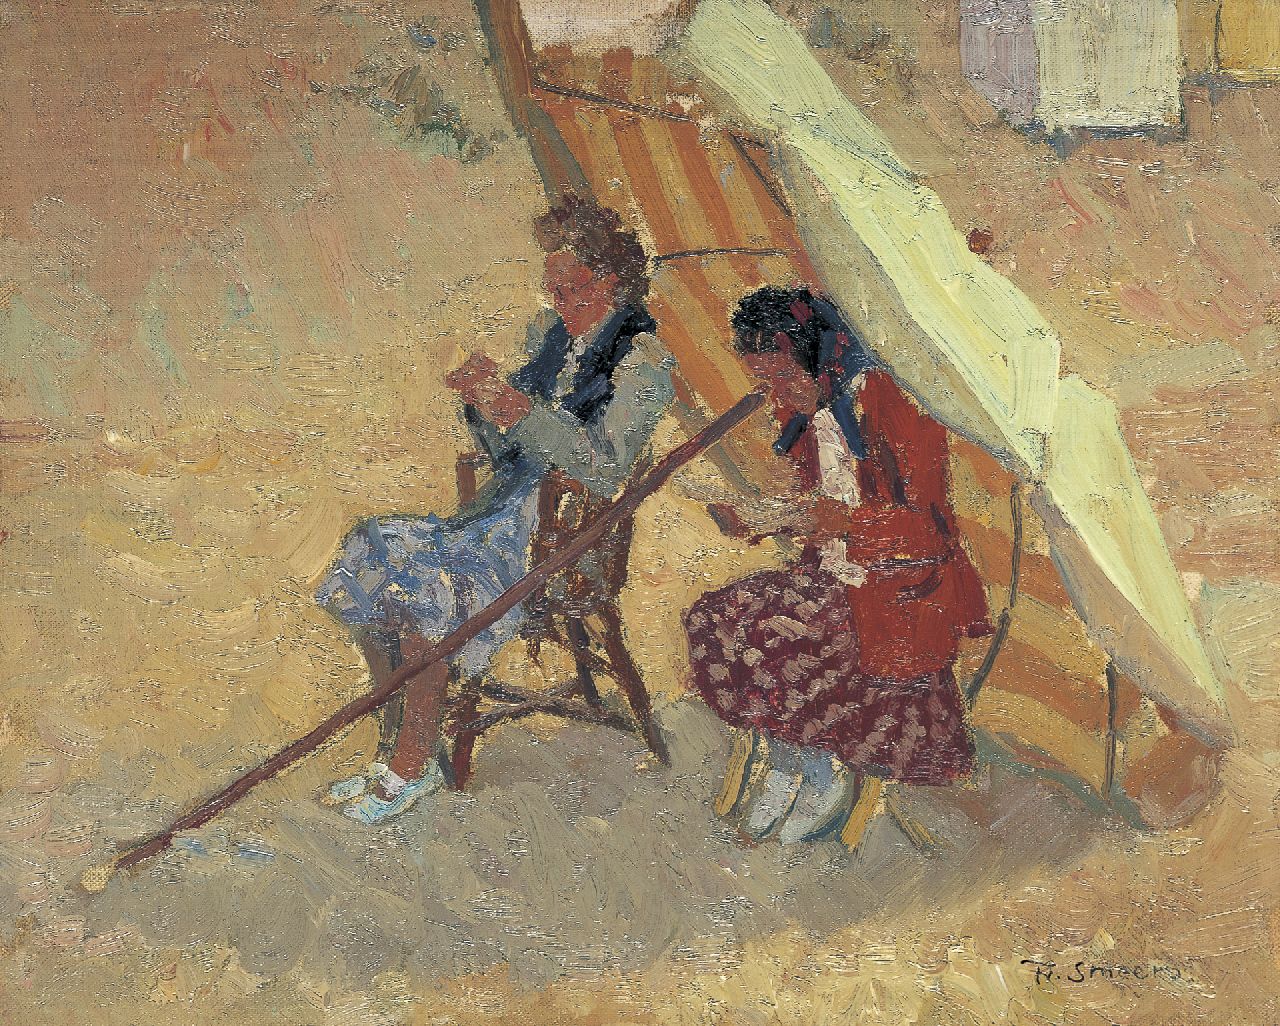 Smeers F.  | Frans Smeers, Women reading on the beach of Nieuwpoort, Öl auf Leinwand Malereifaser 32,9 x 40,9 cm, signed l.r.